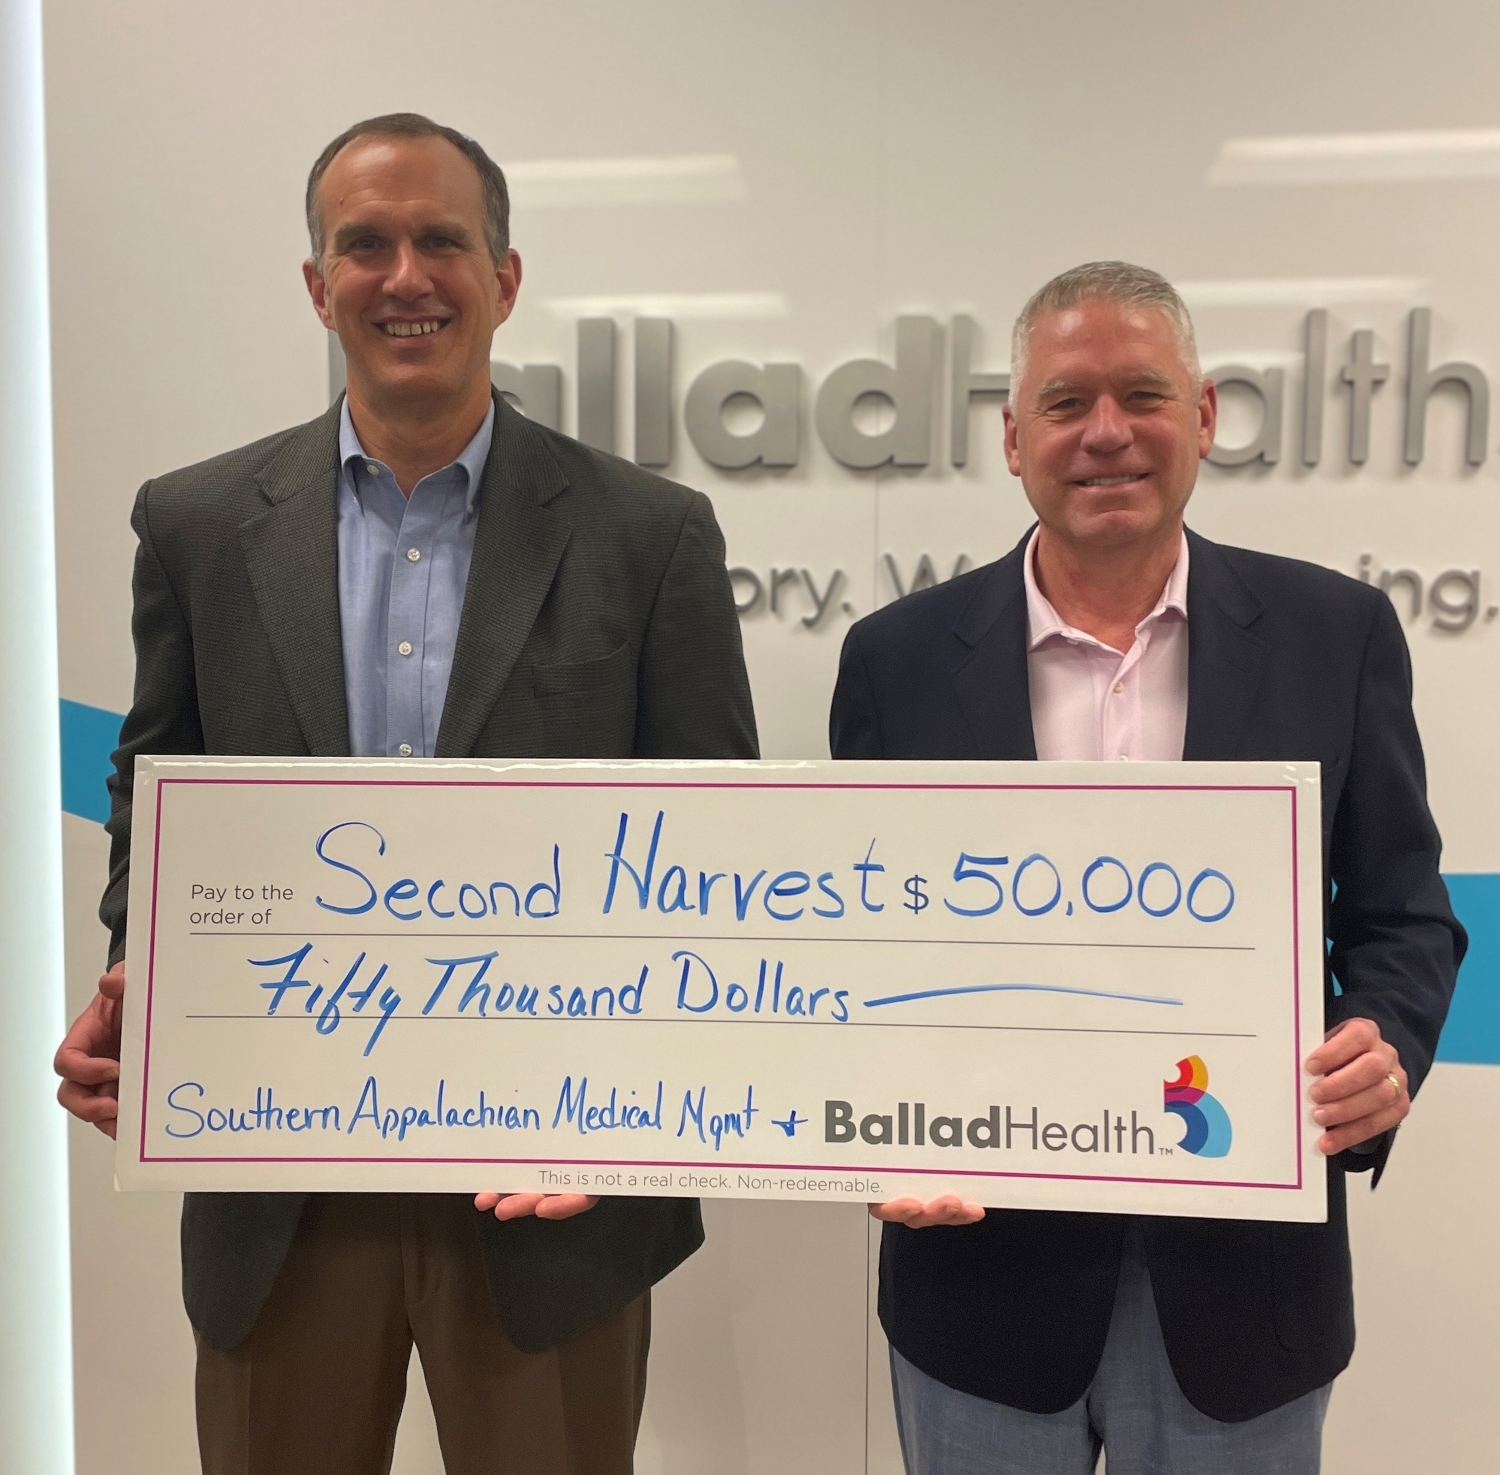 T. Lisle Whitman, MD, with Appalachian Orthopedics, and Eric Deaton, chief operating officer of Ballad Health holding a giant presentation check for $50,000